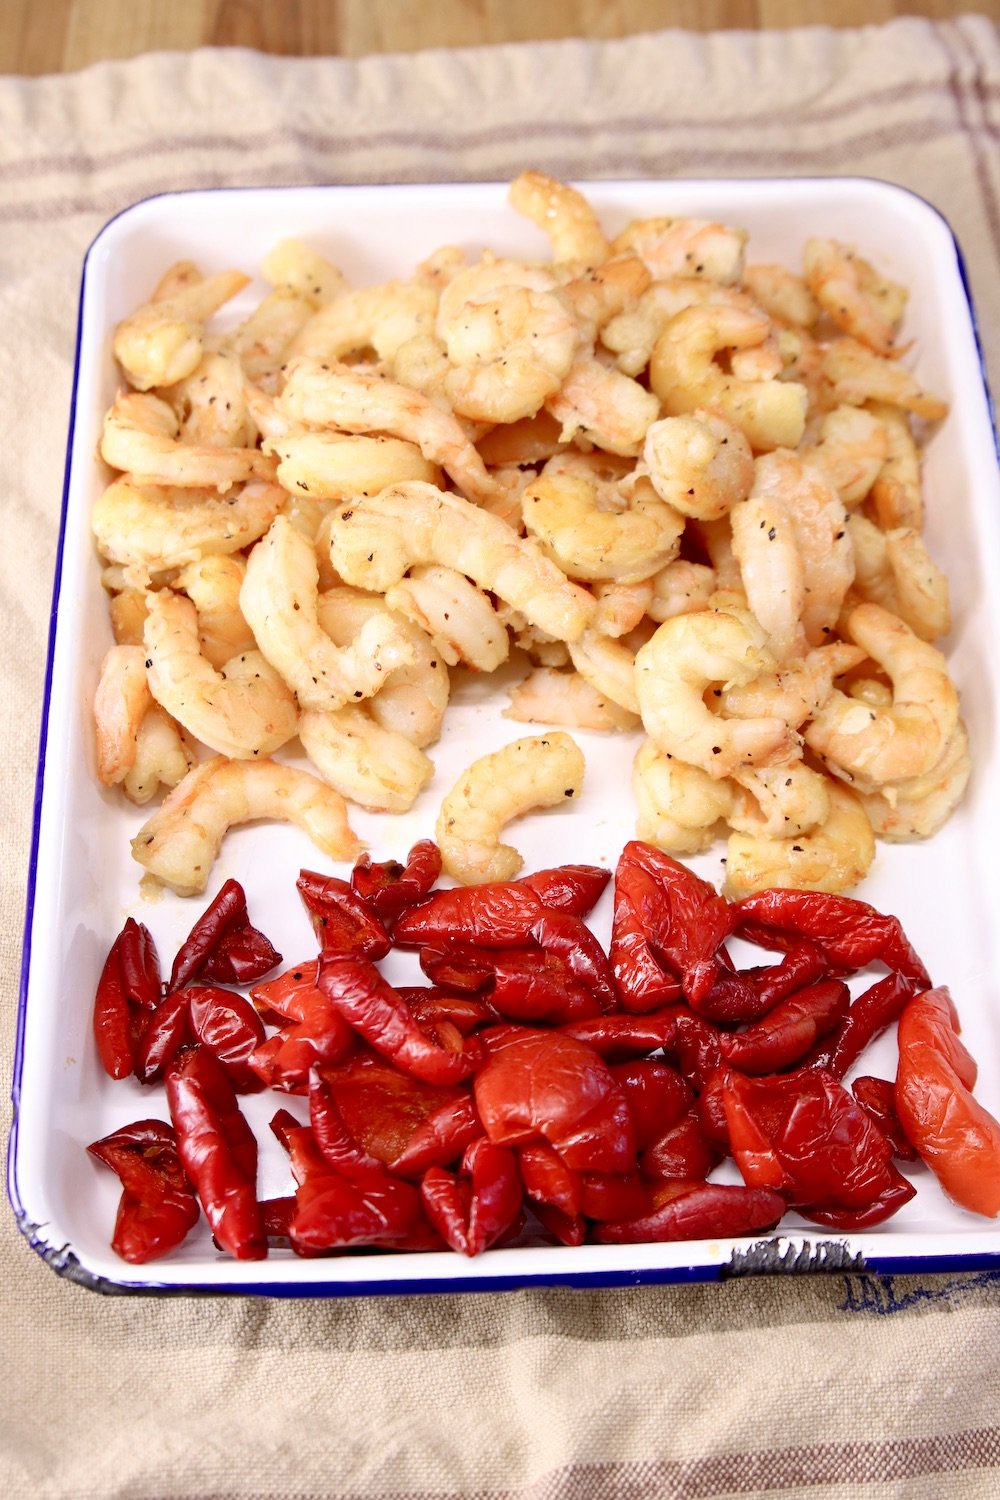 tray of grilled shrimp and red bell peppers